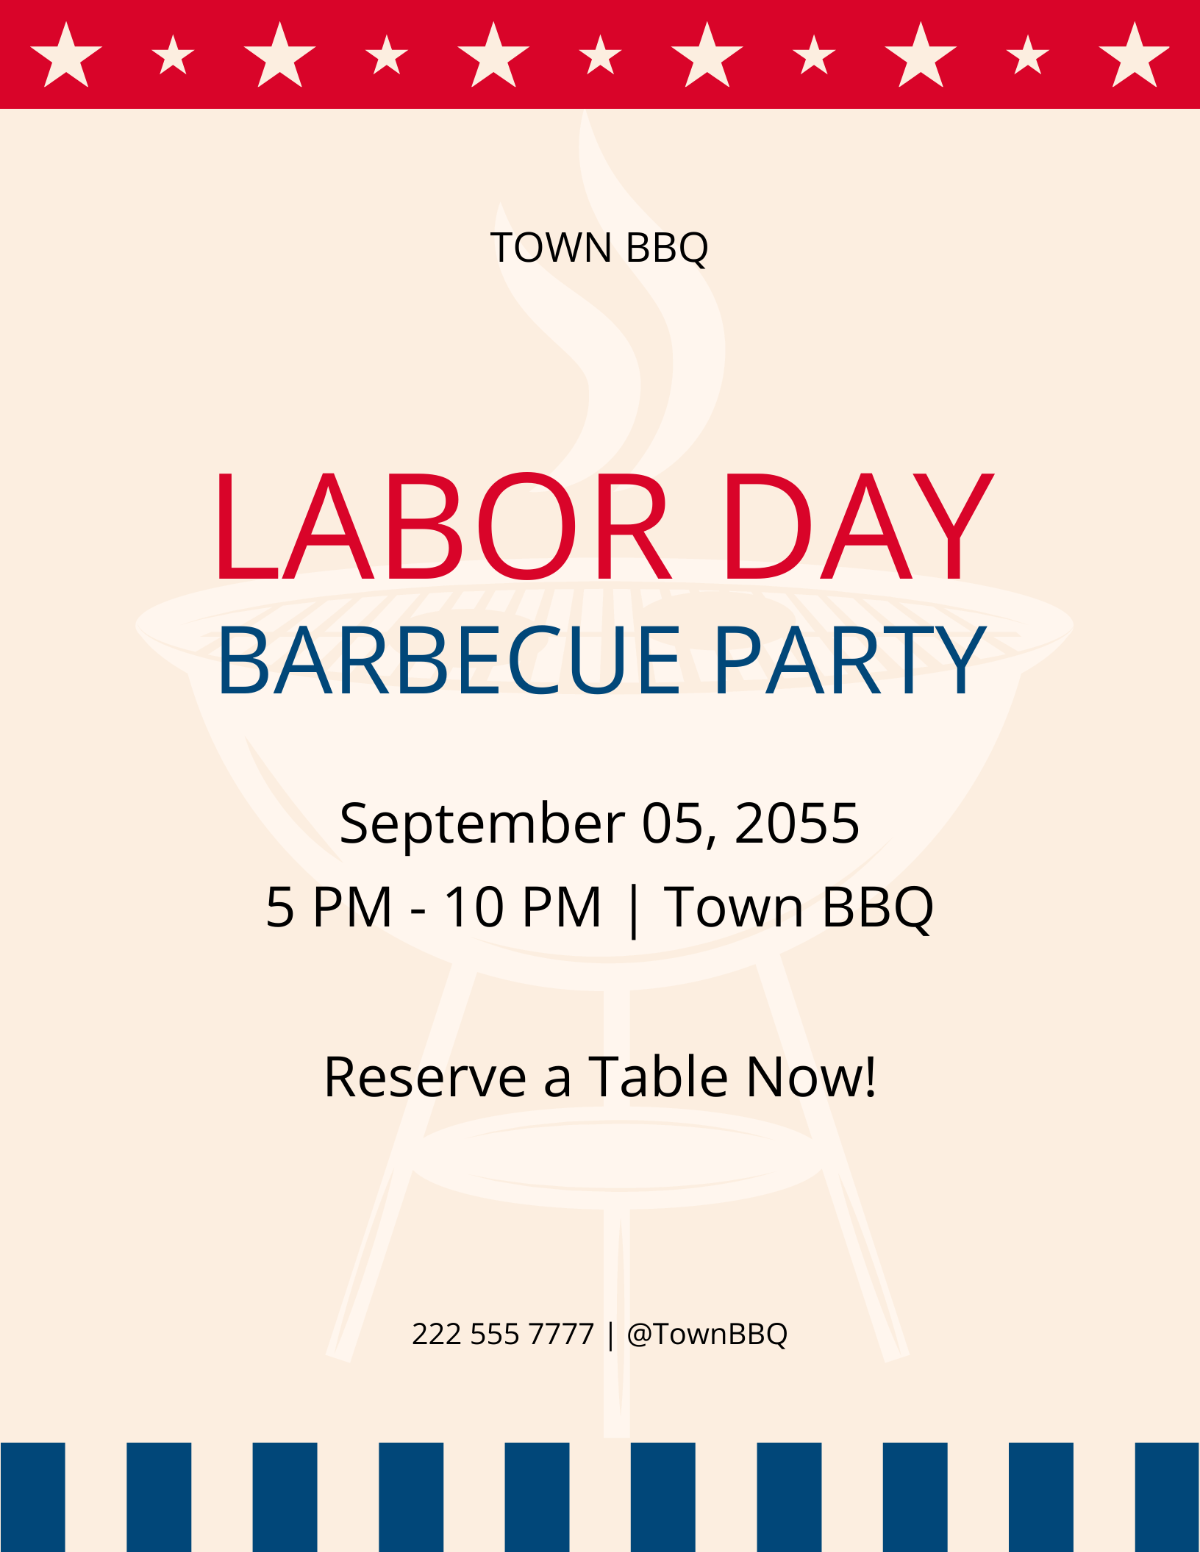 Labor Day Barbecue Party Flyer